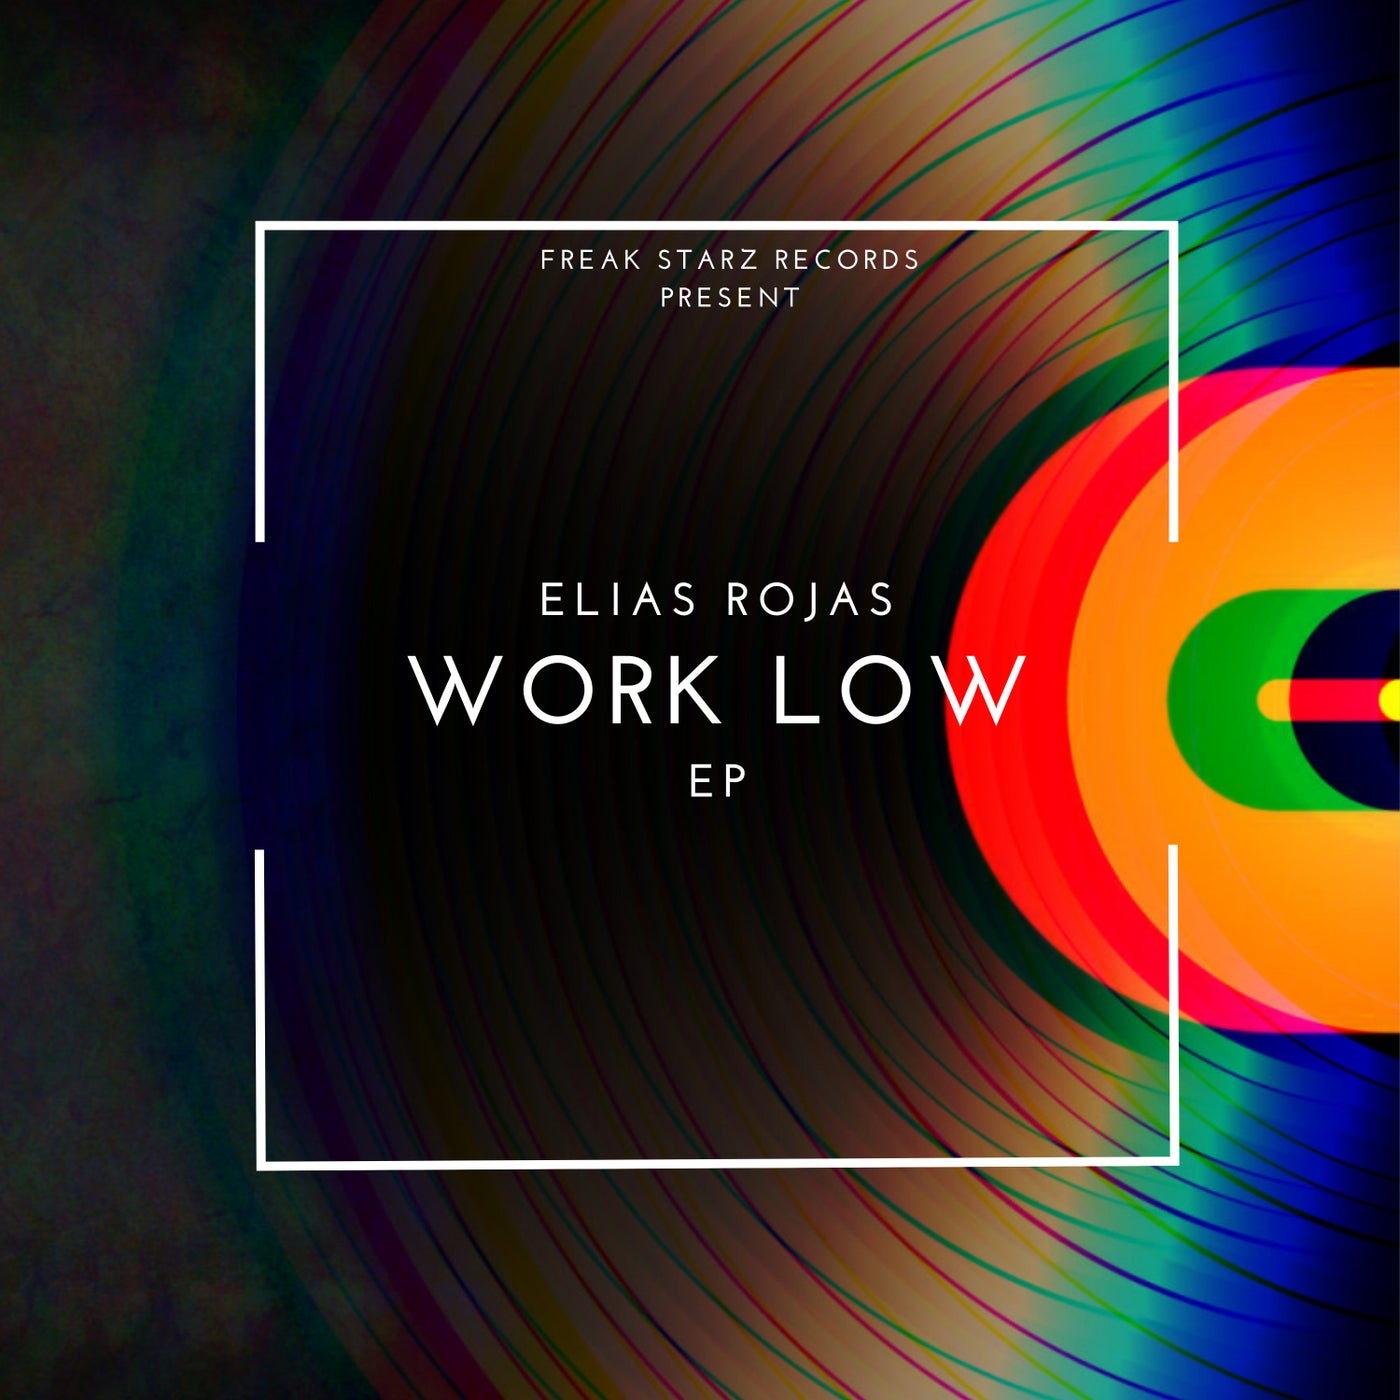 WORK LOW EP